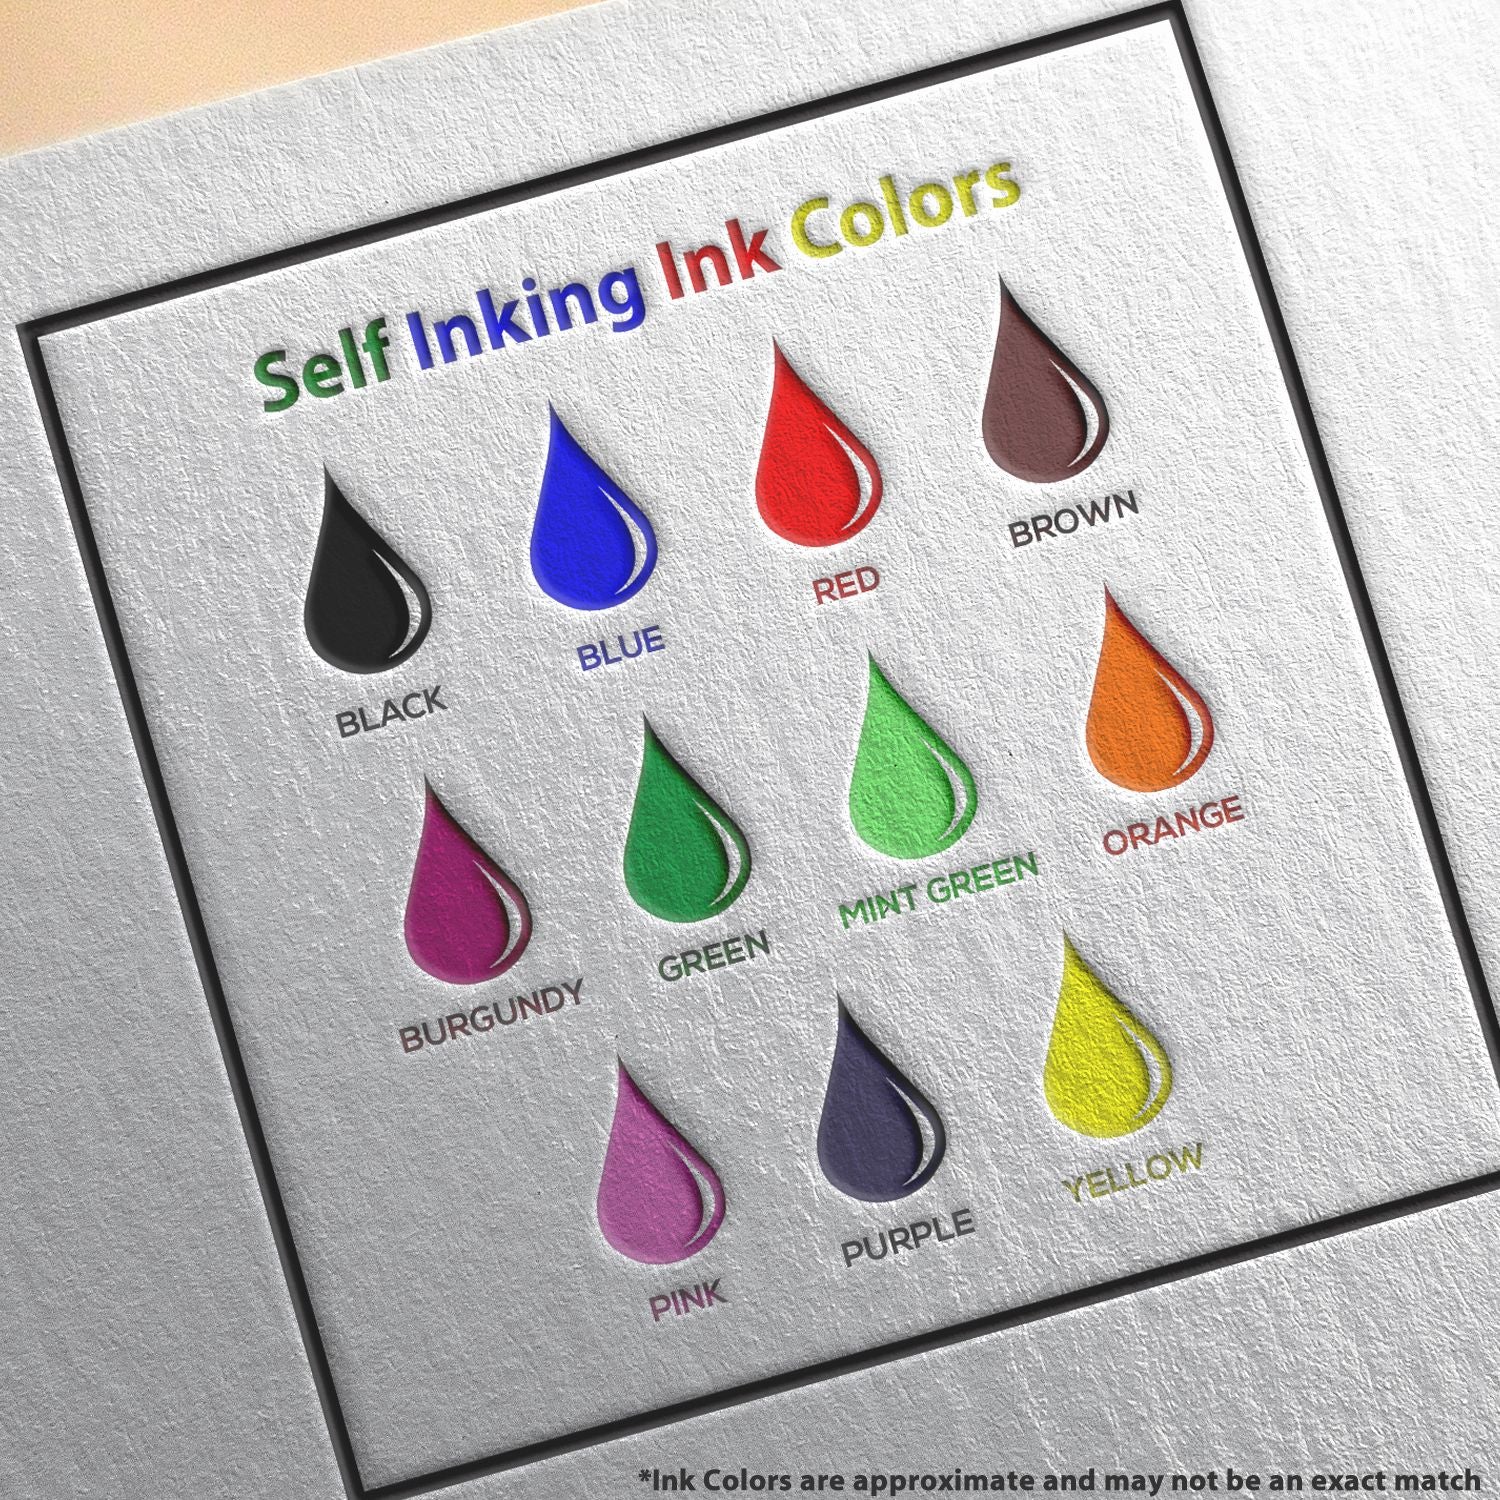 A picture showing the different ink colors or hues available for the Self-Inking Connecticut Landscape Architect Stamp product.